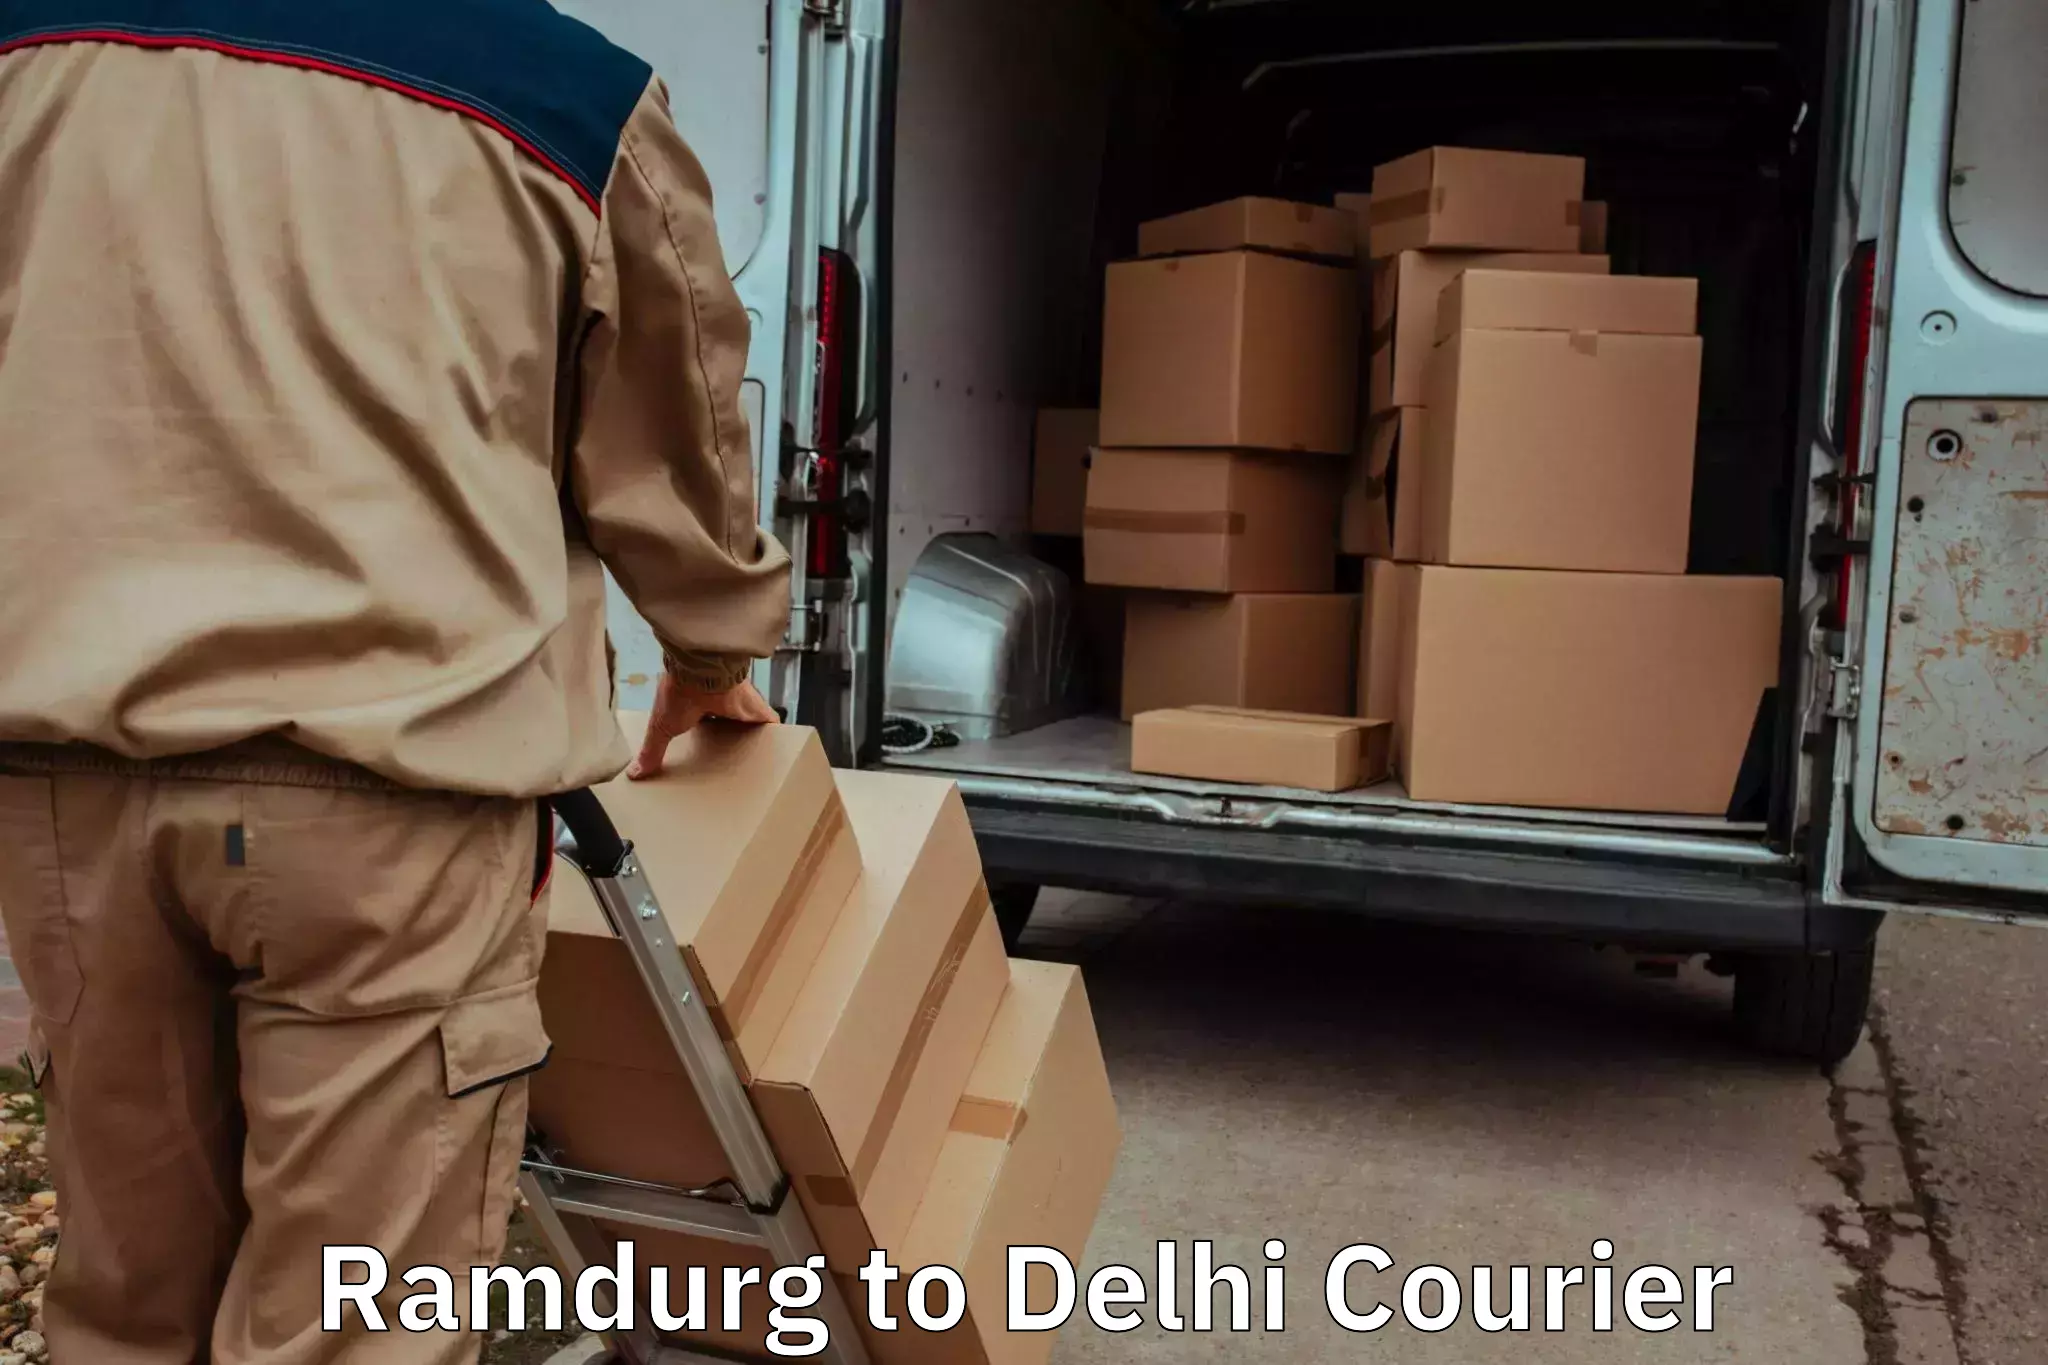 Cost-effective moving options Ramdurg to NCR